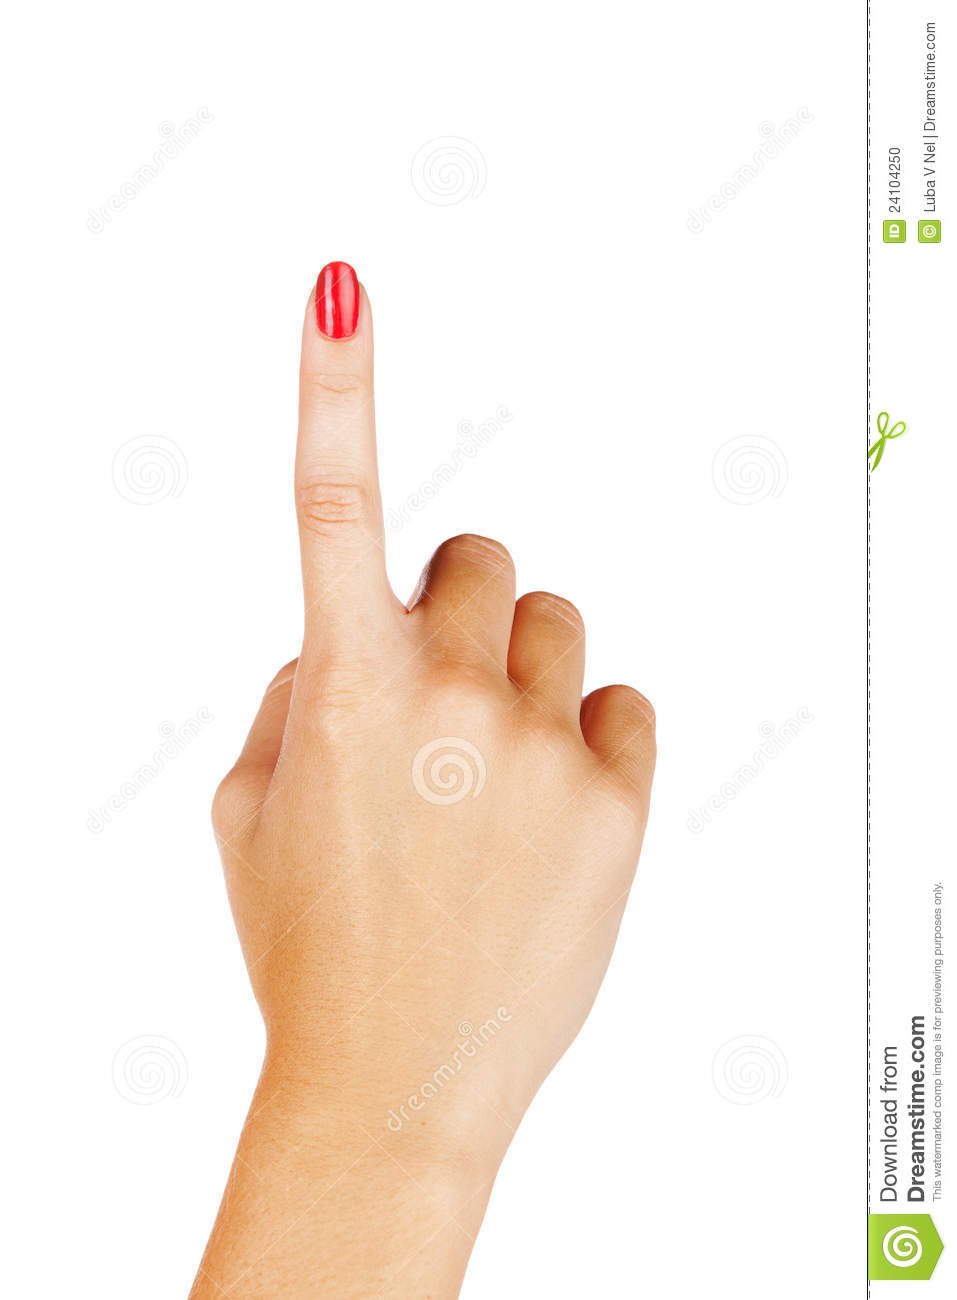 Close Up Of Woman S Hand With Red Nails Pointing With Index Finger On